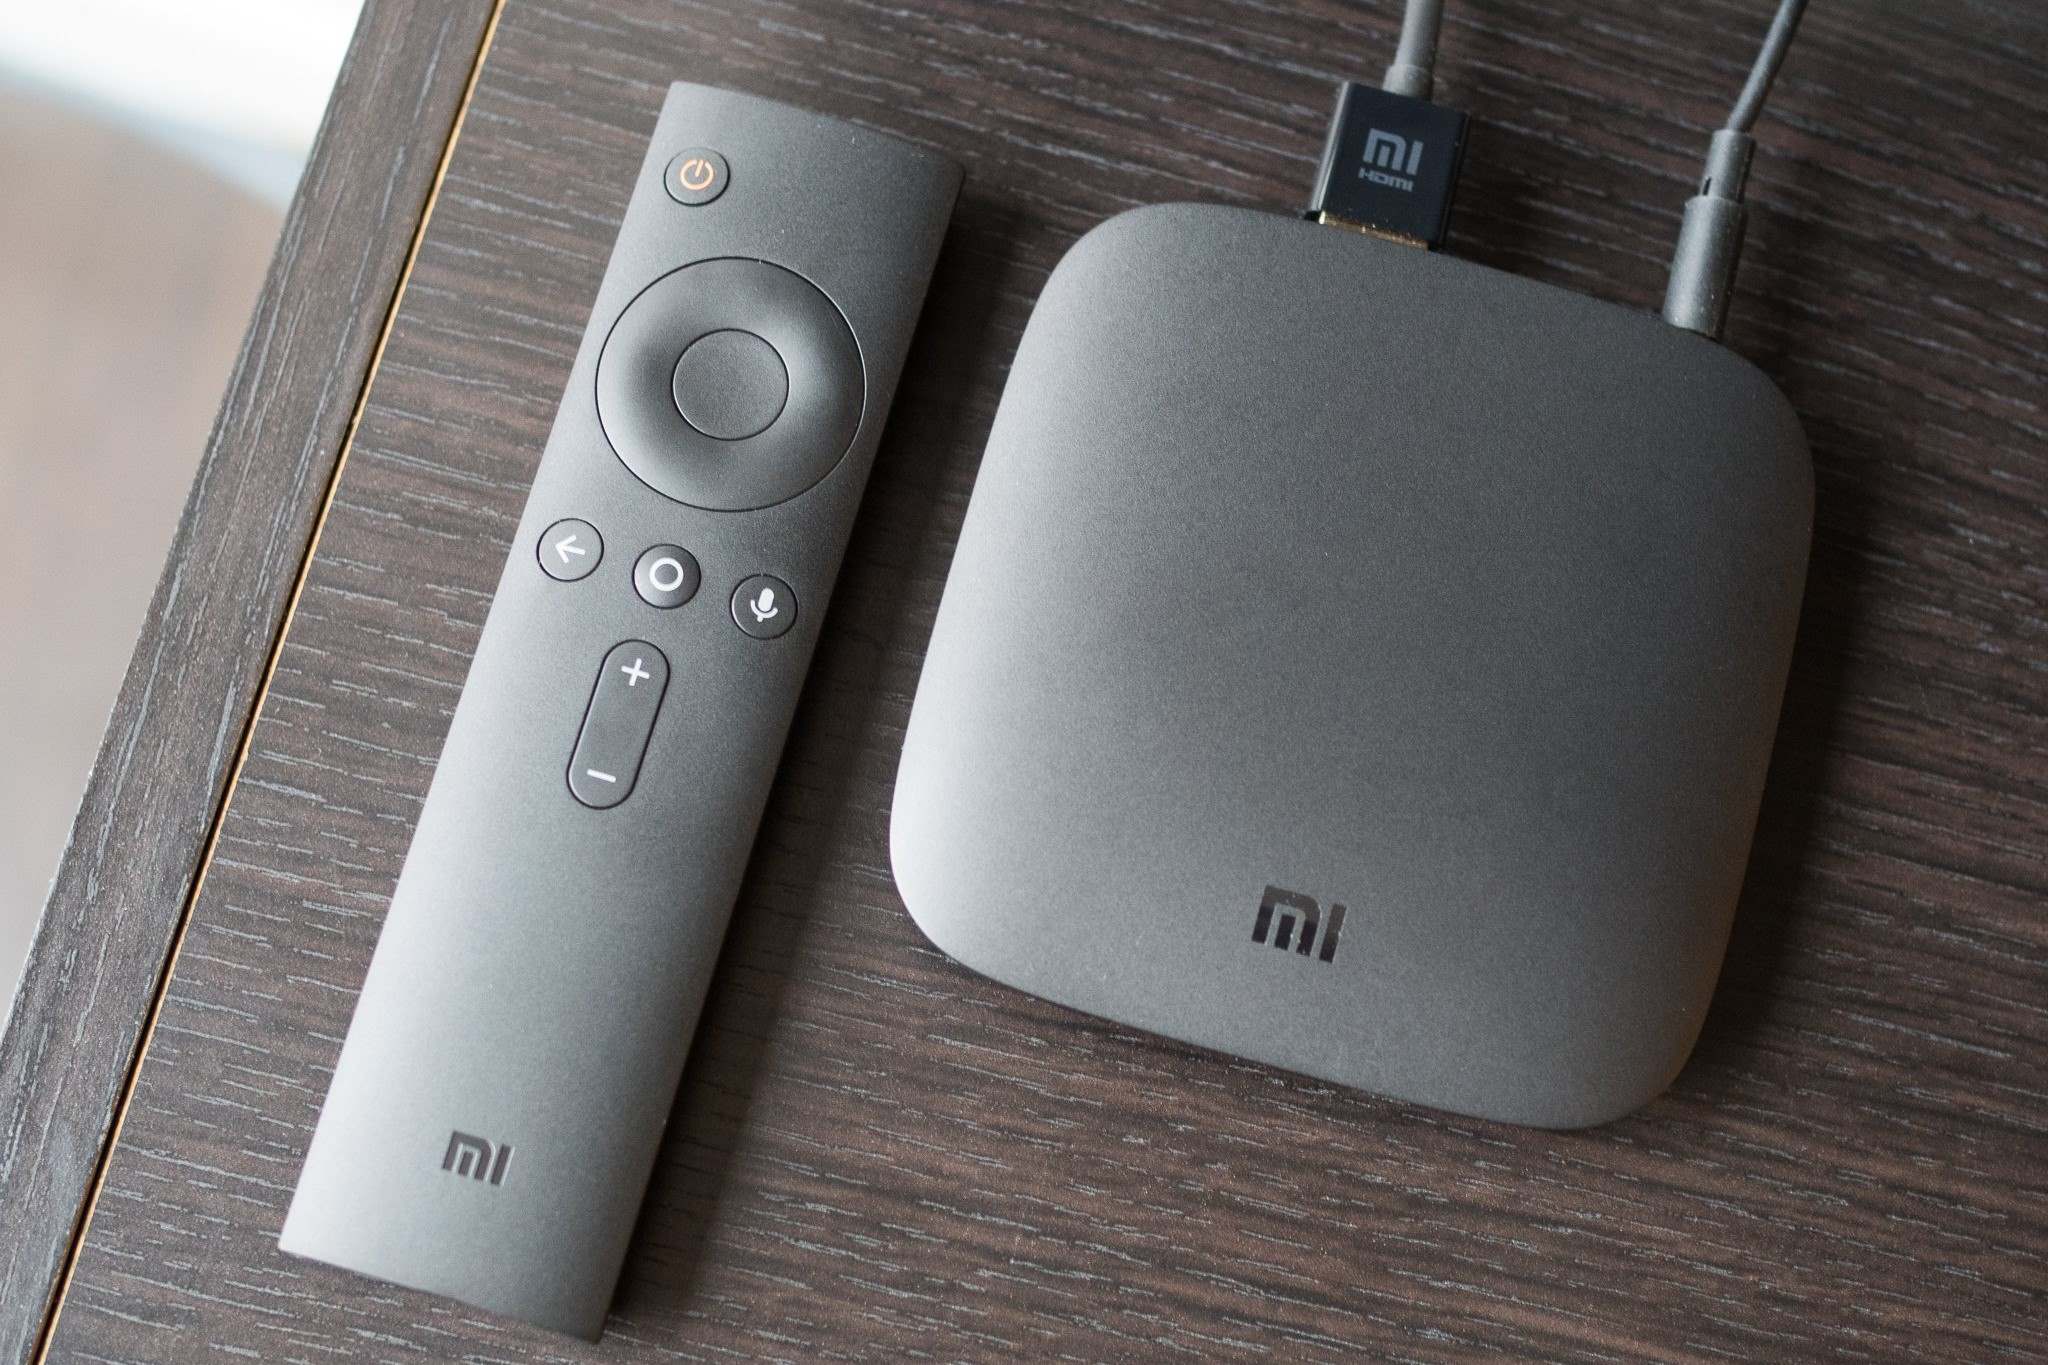 Connecting Xiaomi Box To PC: Step-by-Step Guide